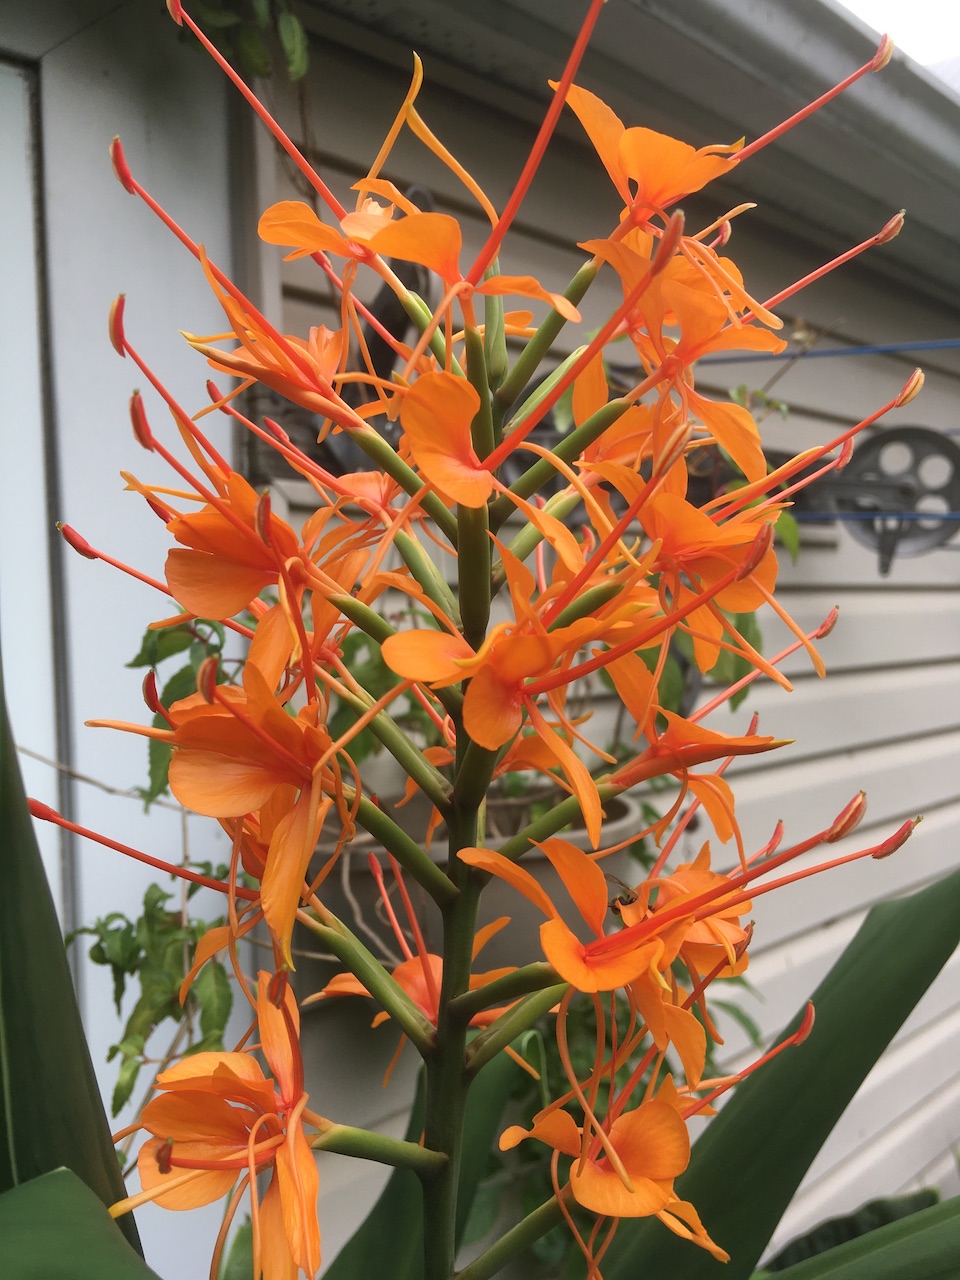 Ginger Lily in bloom